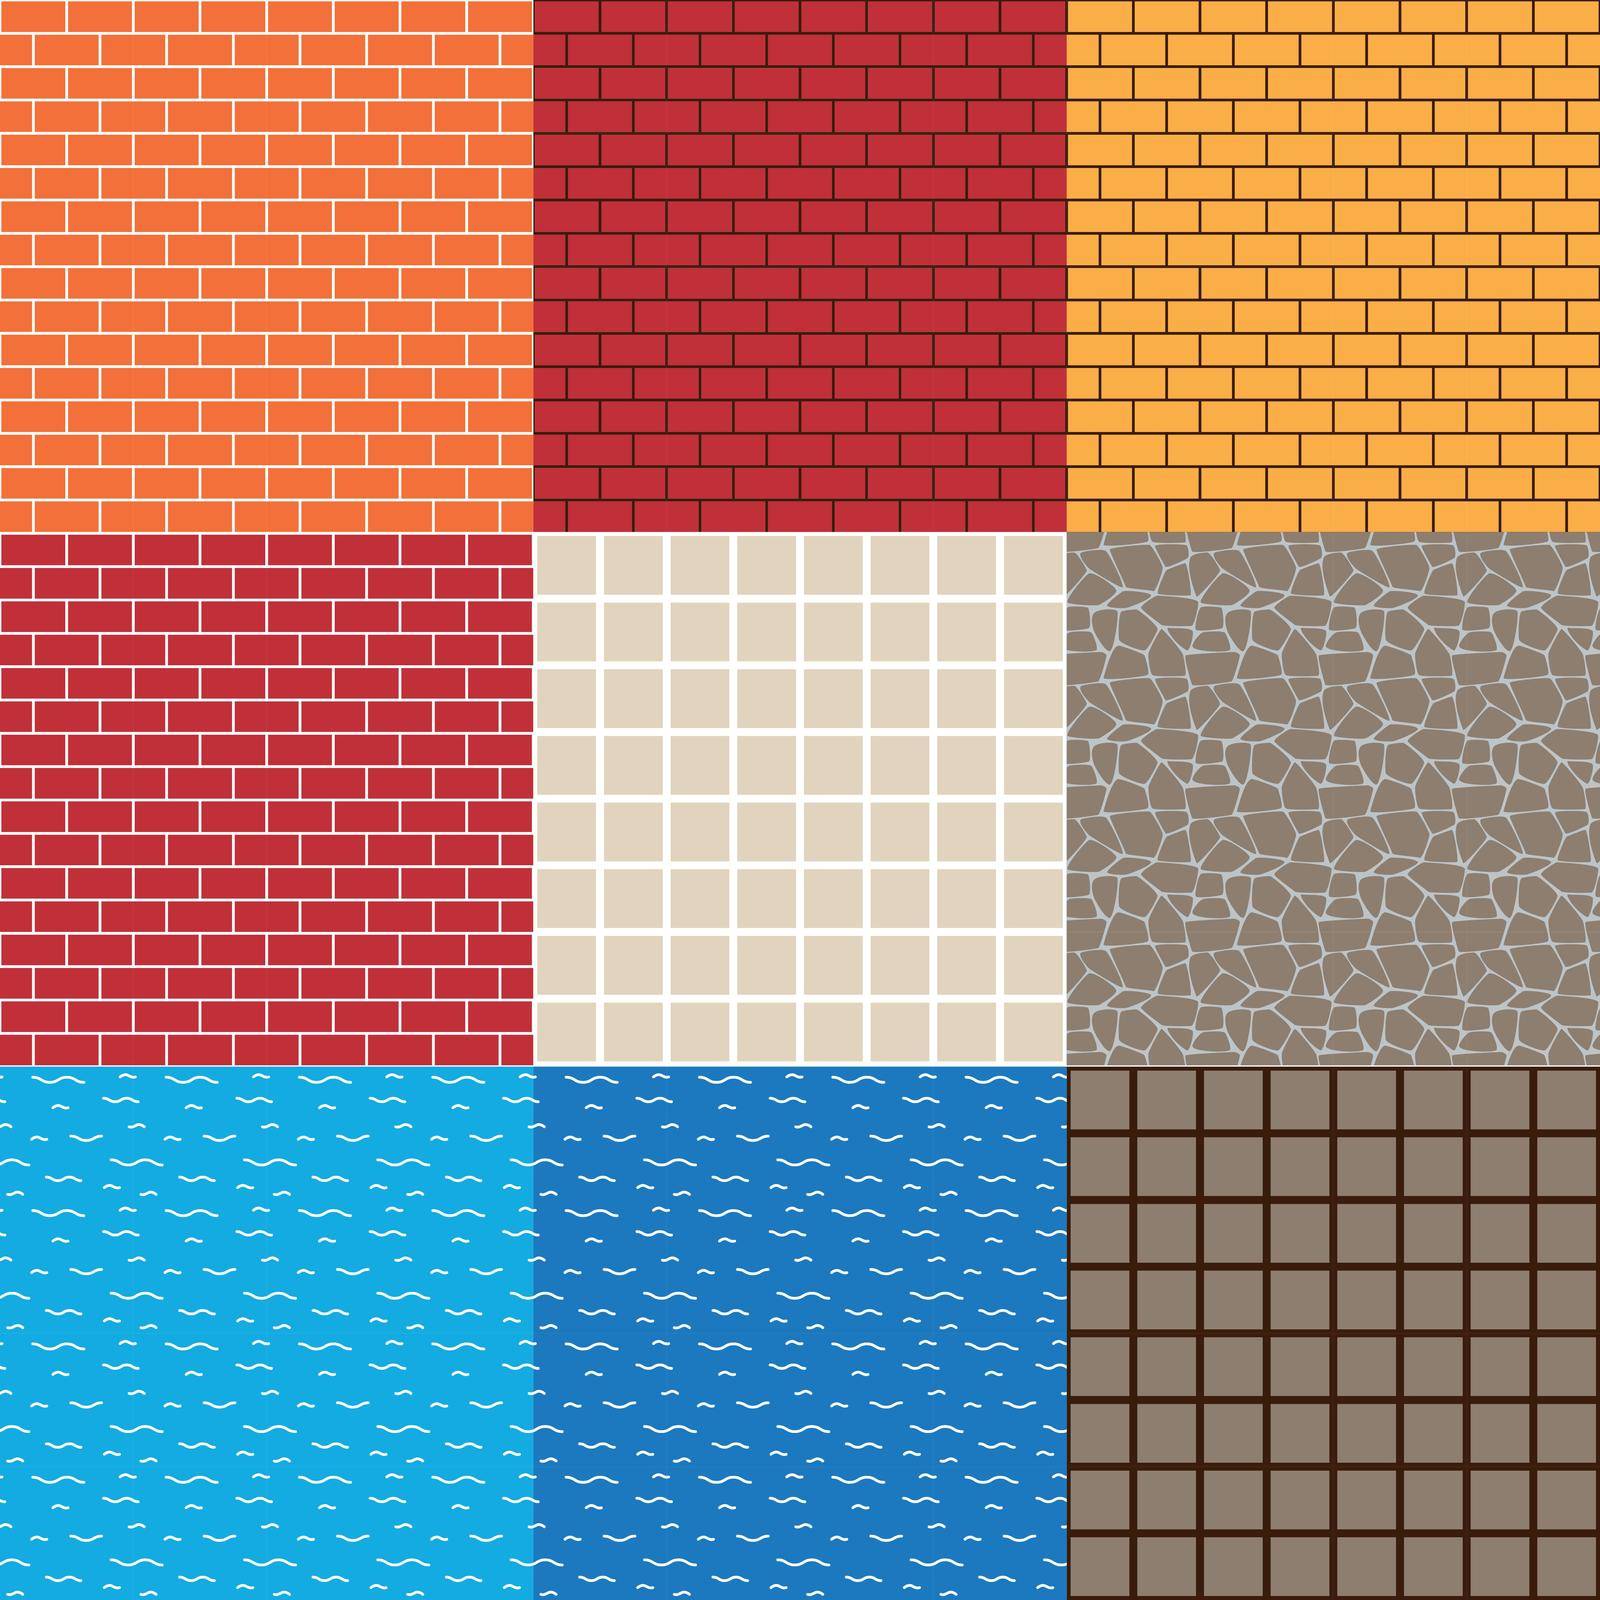 Seamless textures of brick and concrete walls, water, rocks and ground. Vector patterns for backgrounds or game design